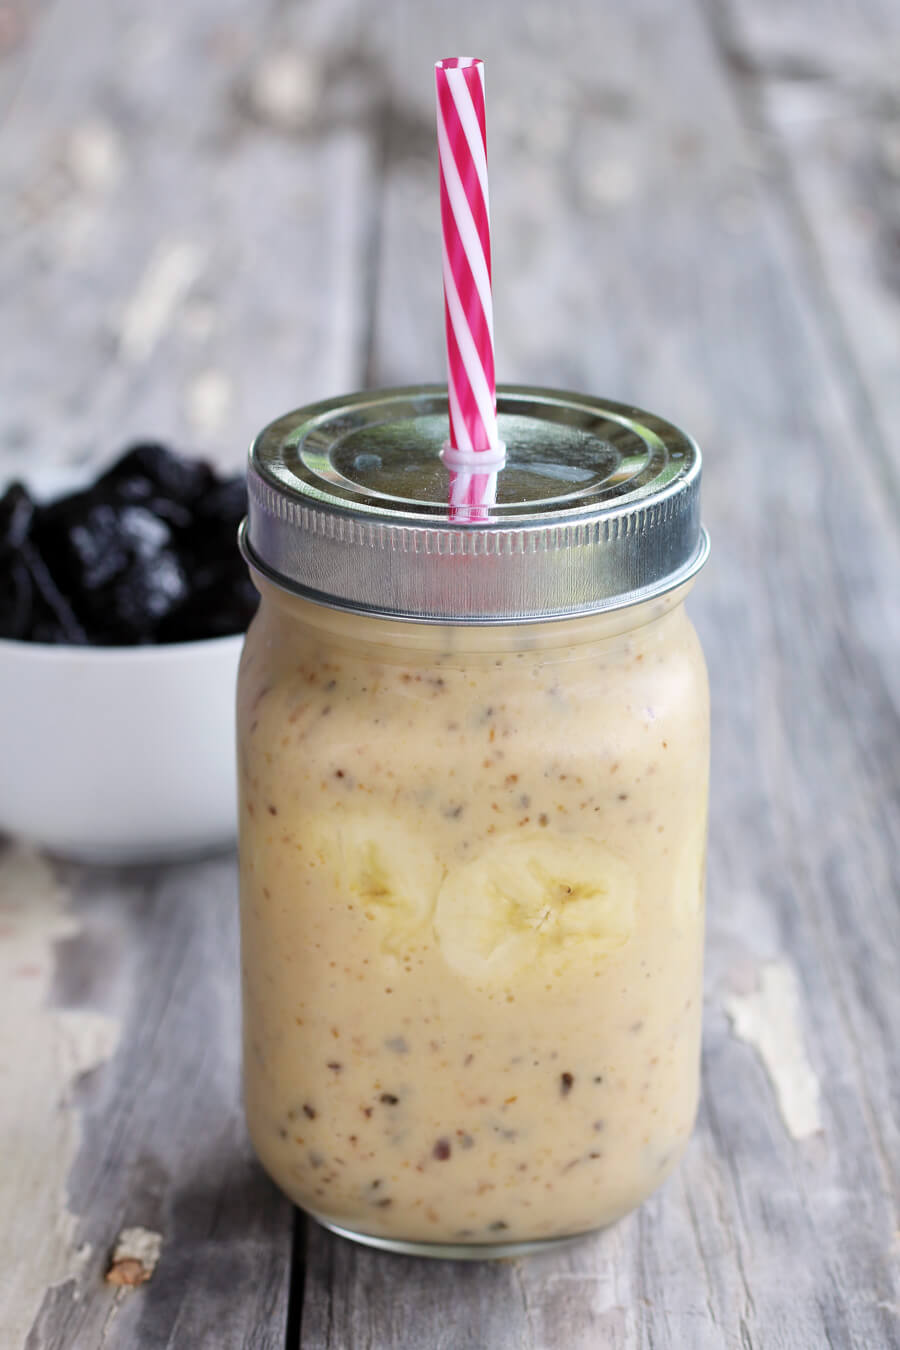 TWO yummy breakfast smoothie recipes: Banana Pineapple and Mango Berry. Full of fruit and wholesome ingredients, these refreshing morning smoothies are a boost of morning energy.